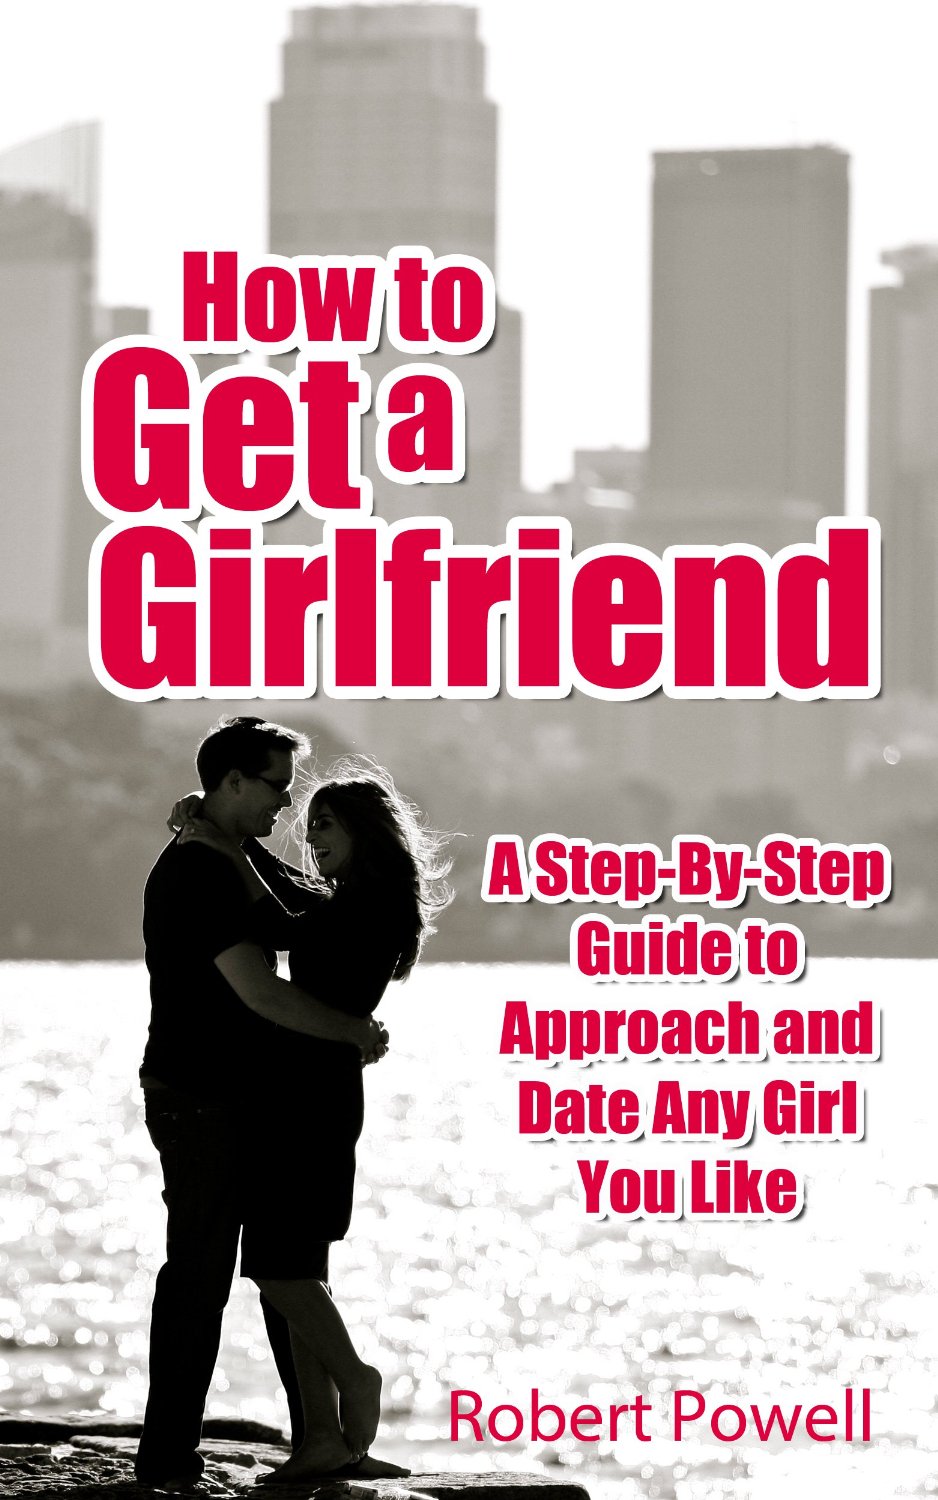 How to Get a Girlfriend – A Step-By-Step Guide to Approach and Date Any Girl You Like by Robert Powell